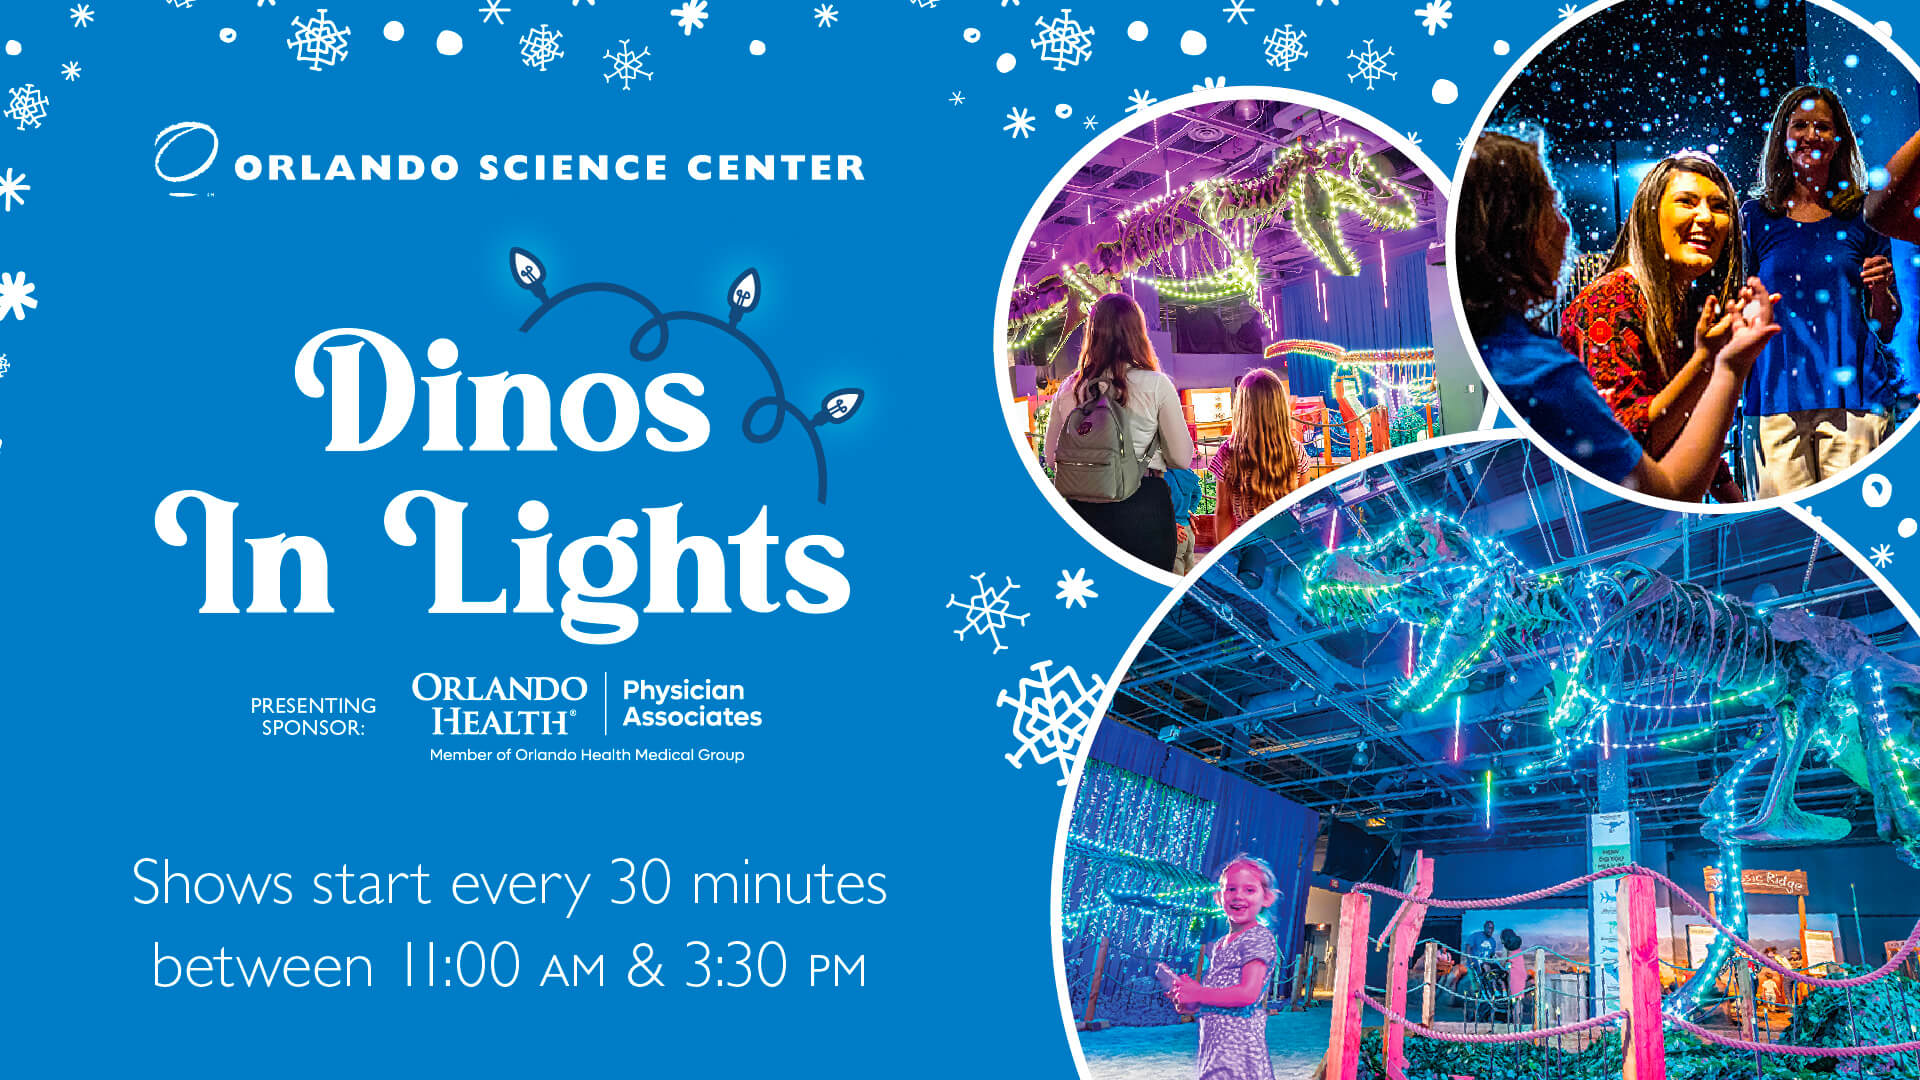 Dinos In Lights - Presenting Sponsor Orlando Health Physician Associates. Shows start every 30 minutes between 11:00 am & 3:30 pm.